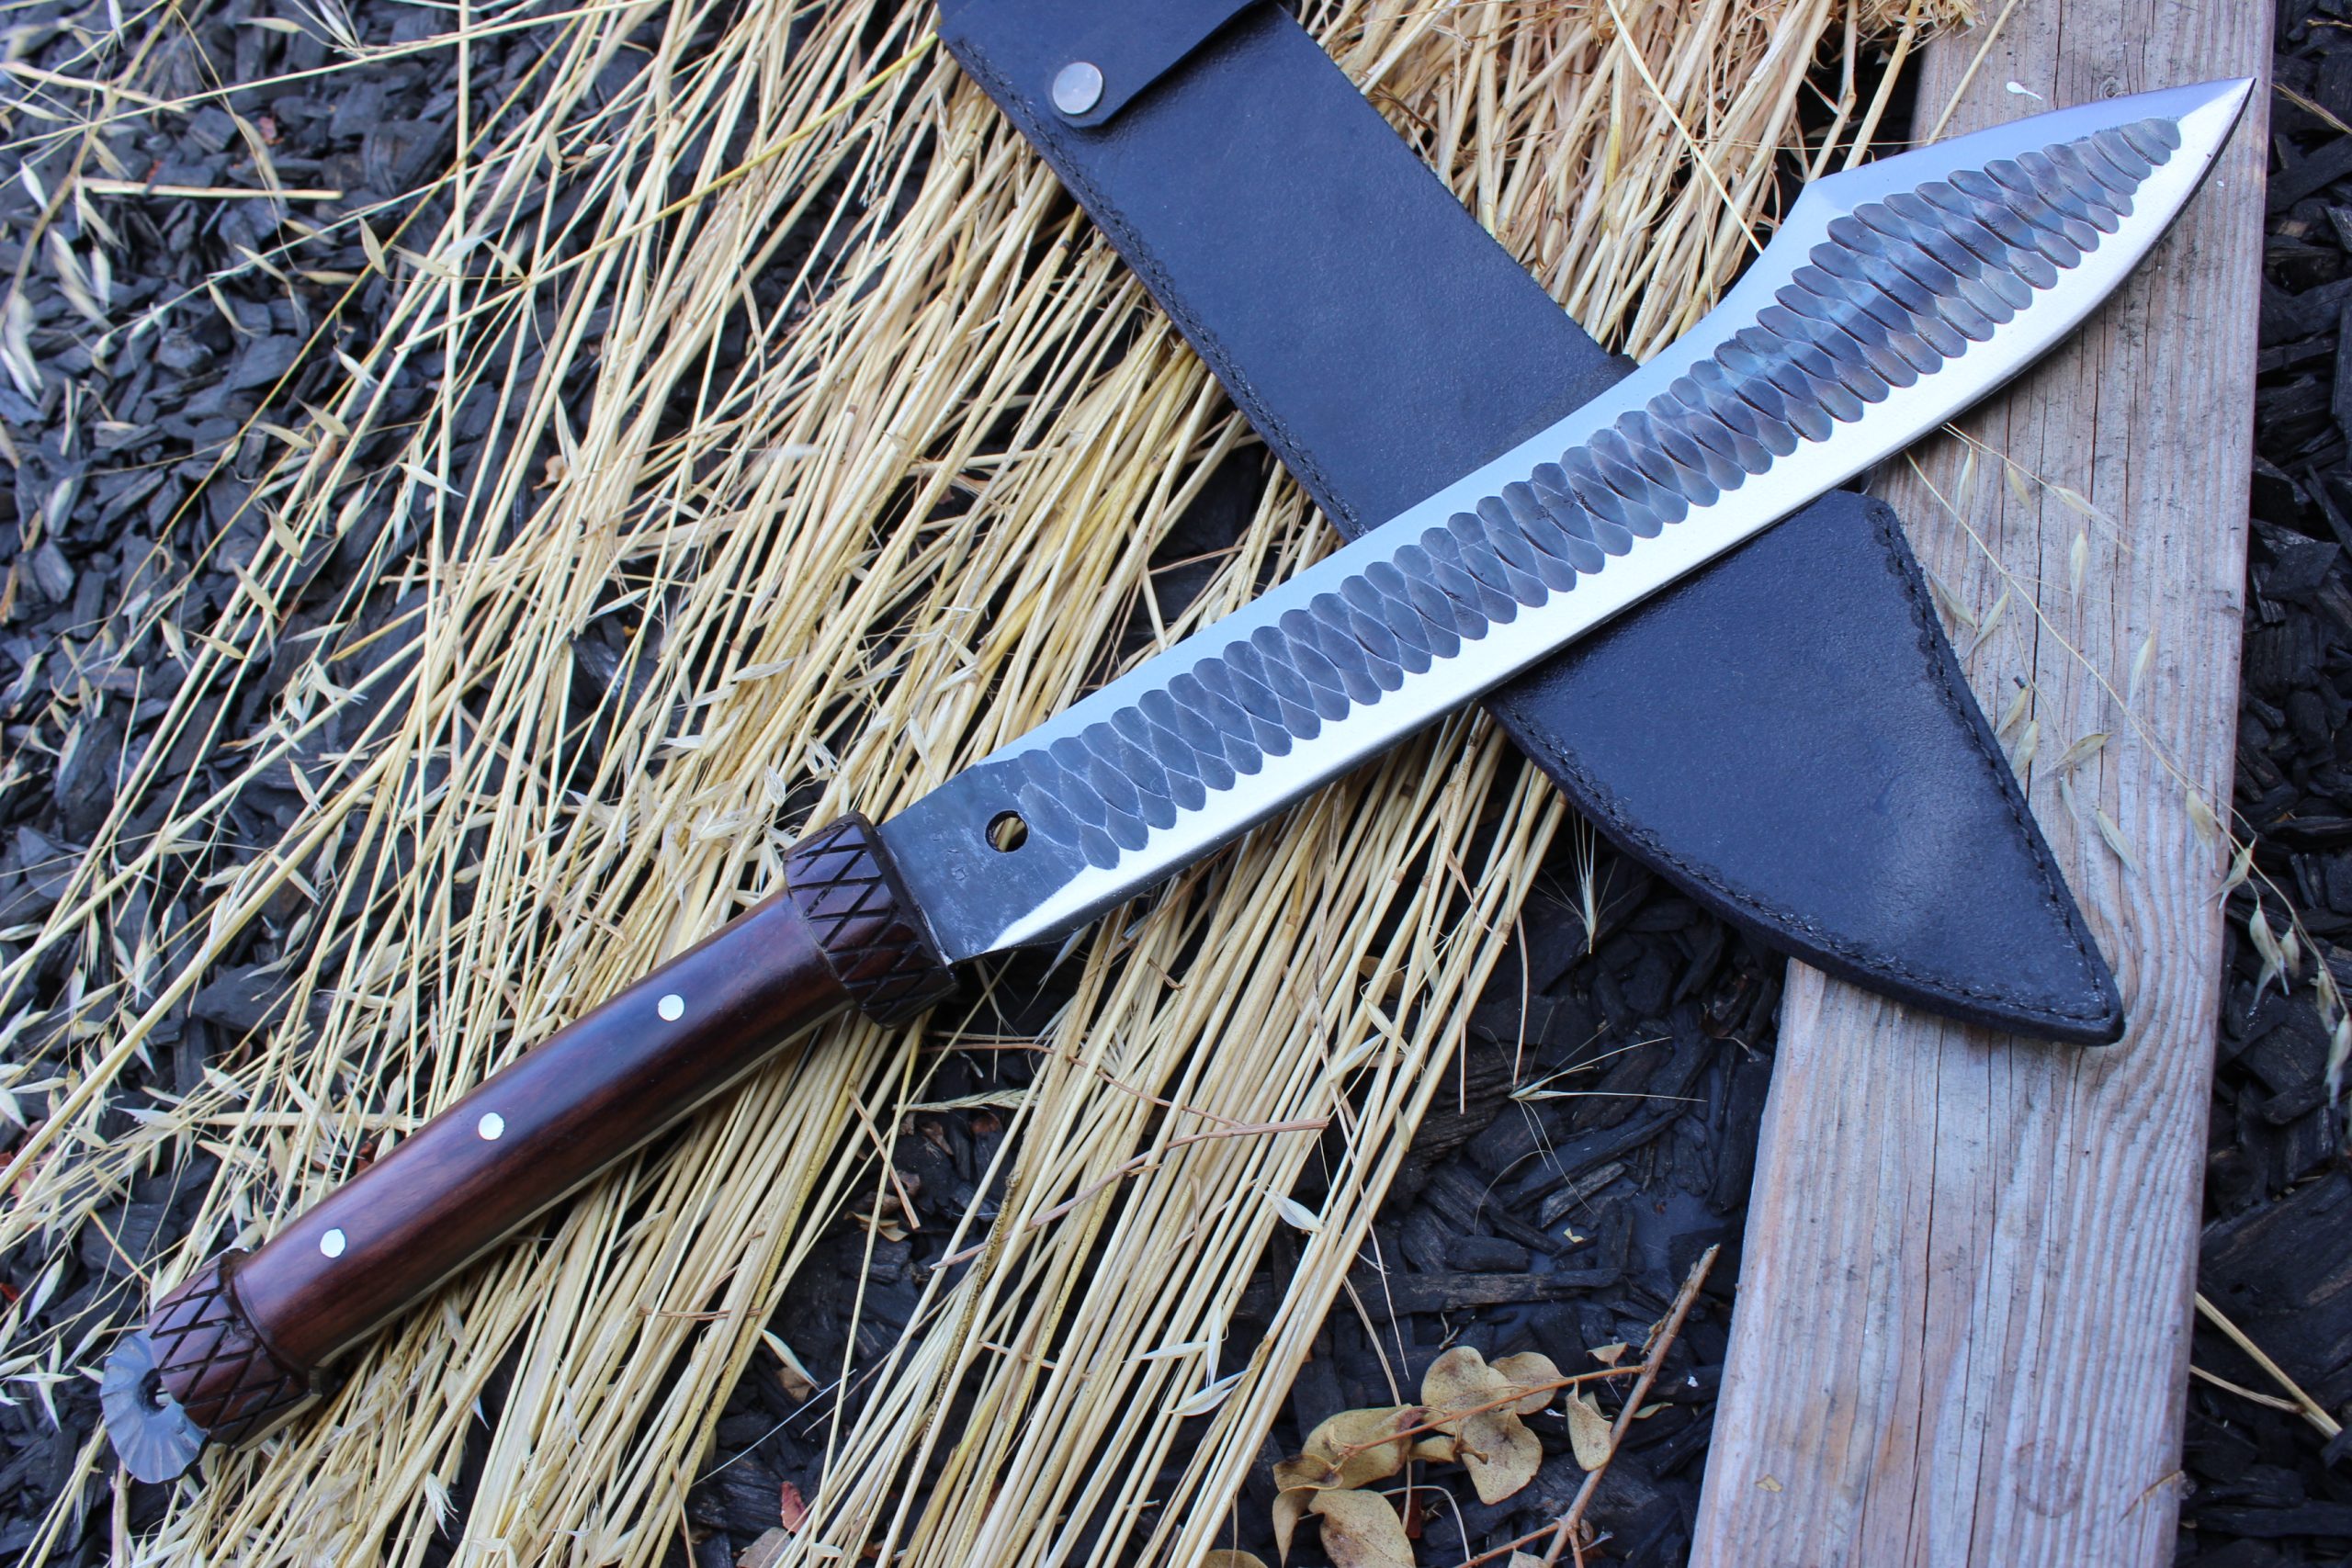 15" Expedition Cleaver - Rust Free Hand Forged Blade Machete-9742